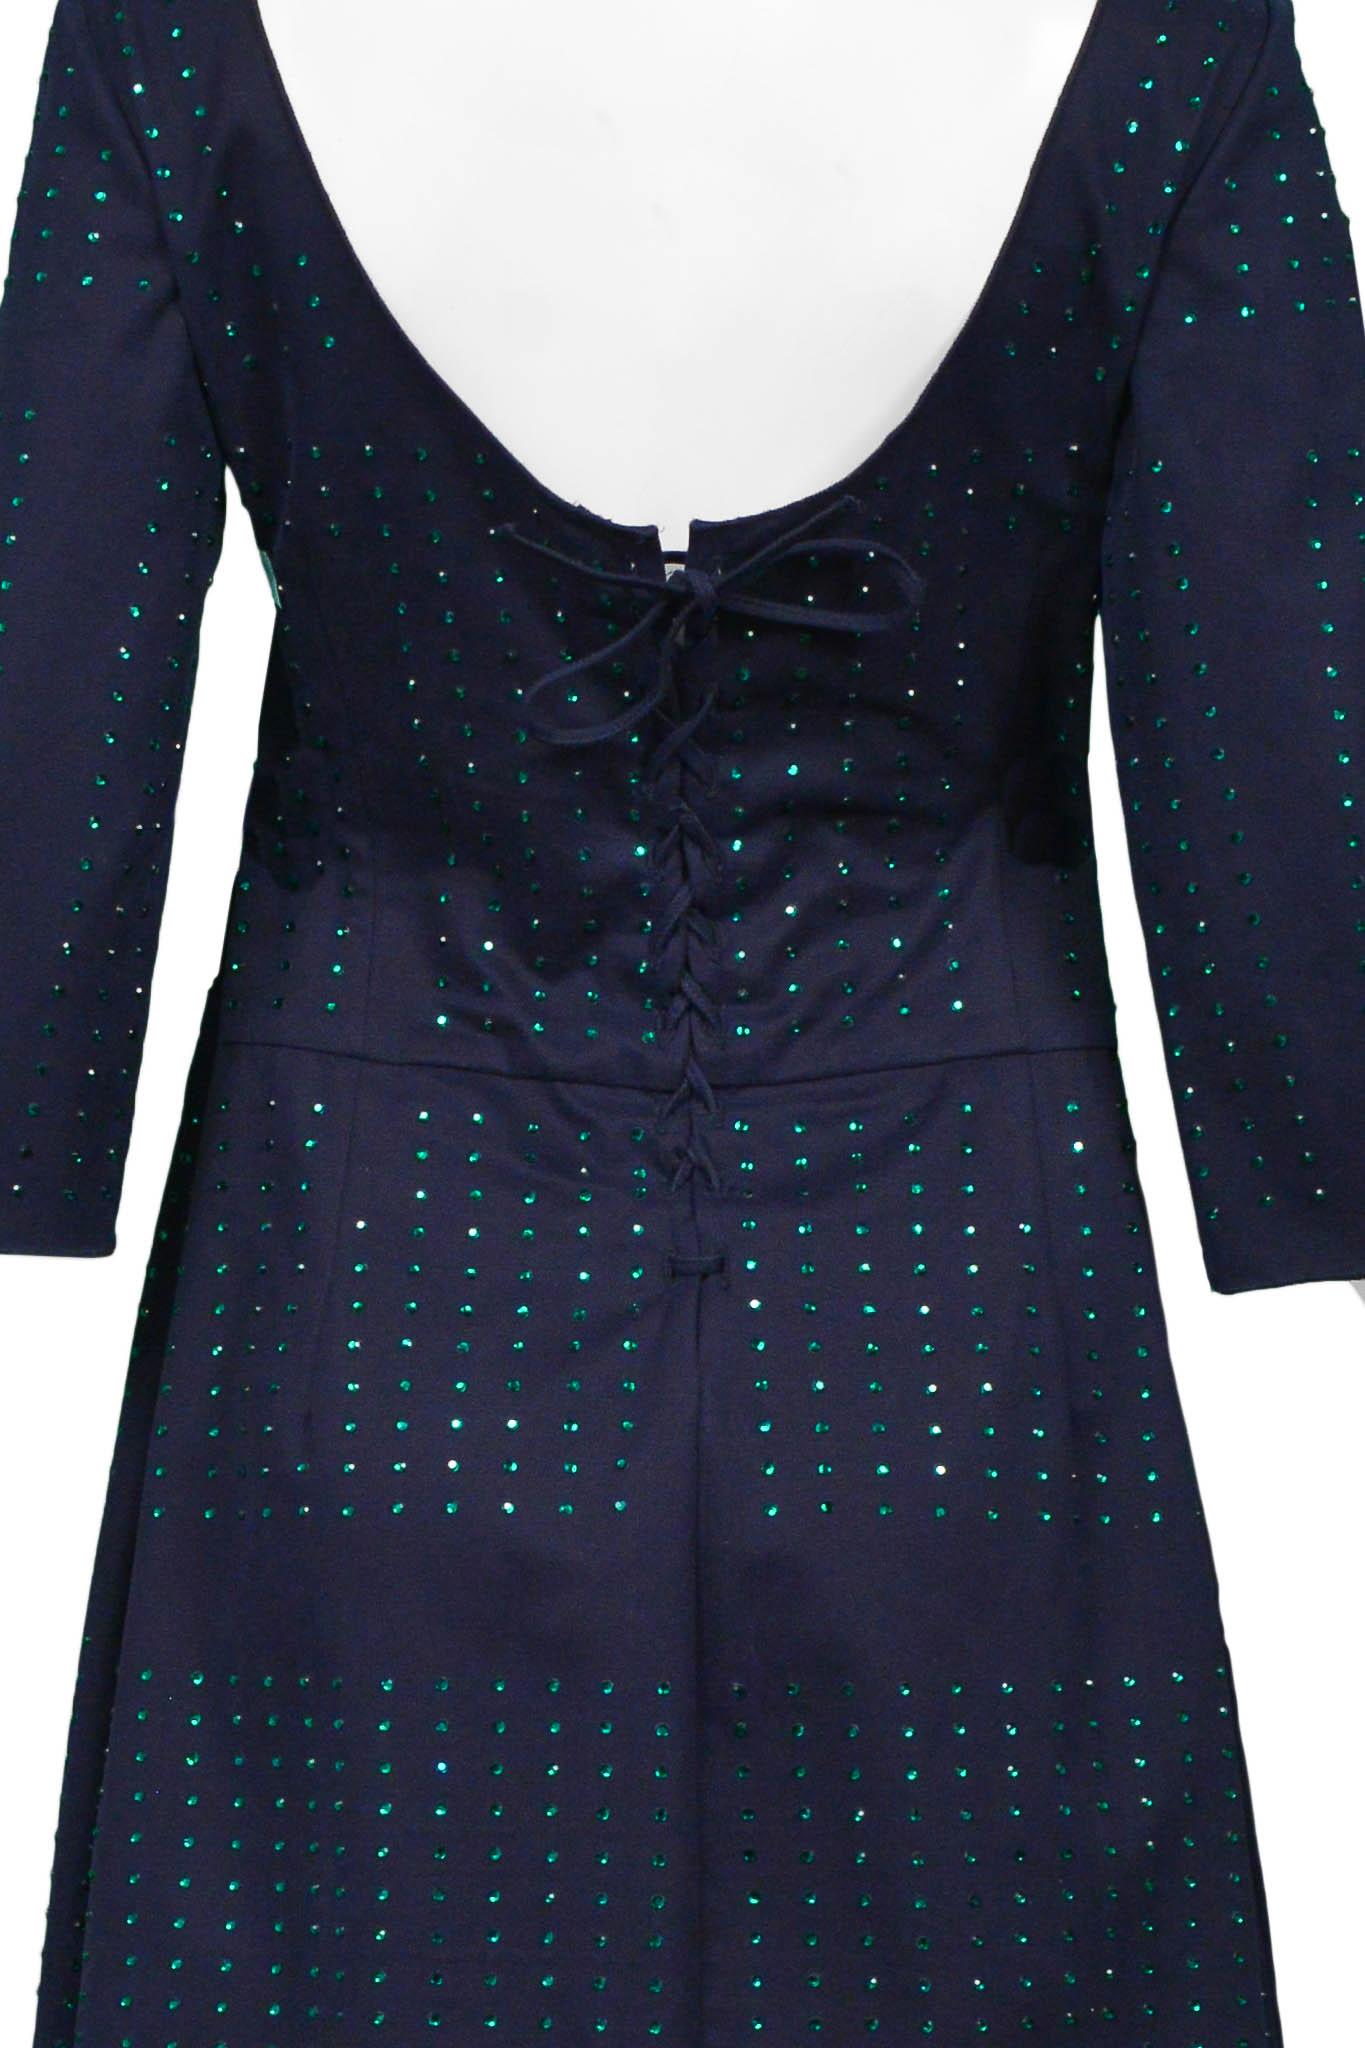 Miu Miu Navy Mini Dress With Green Rhinestones In Excellent Condition For Sale In Los Angeles, CA